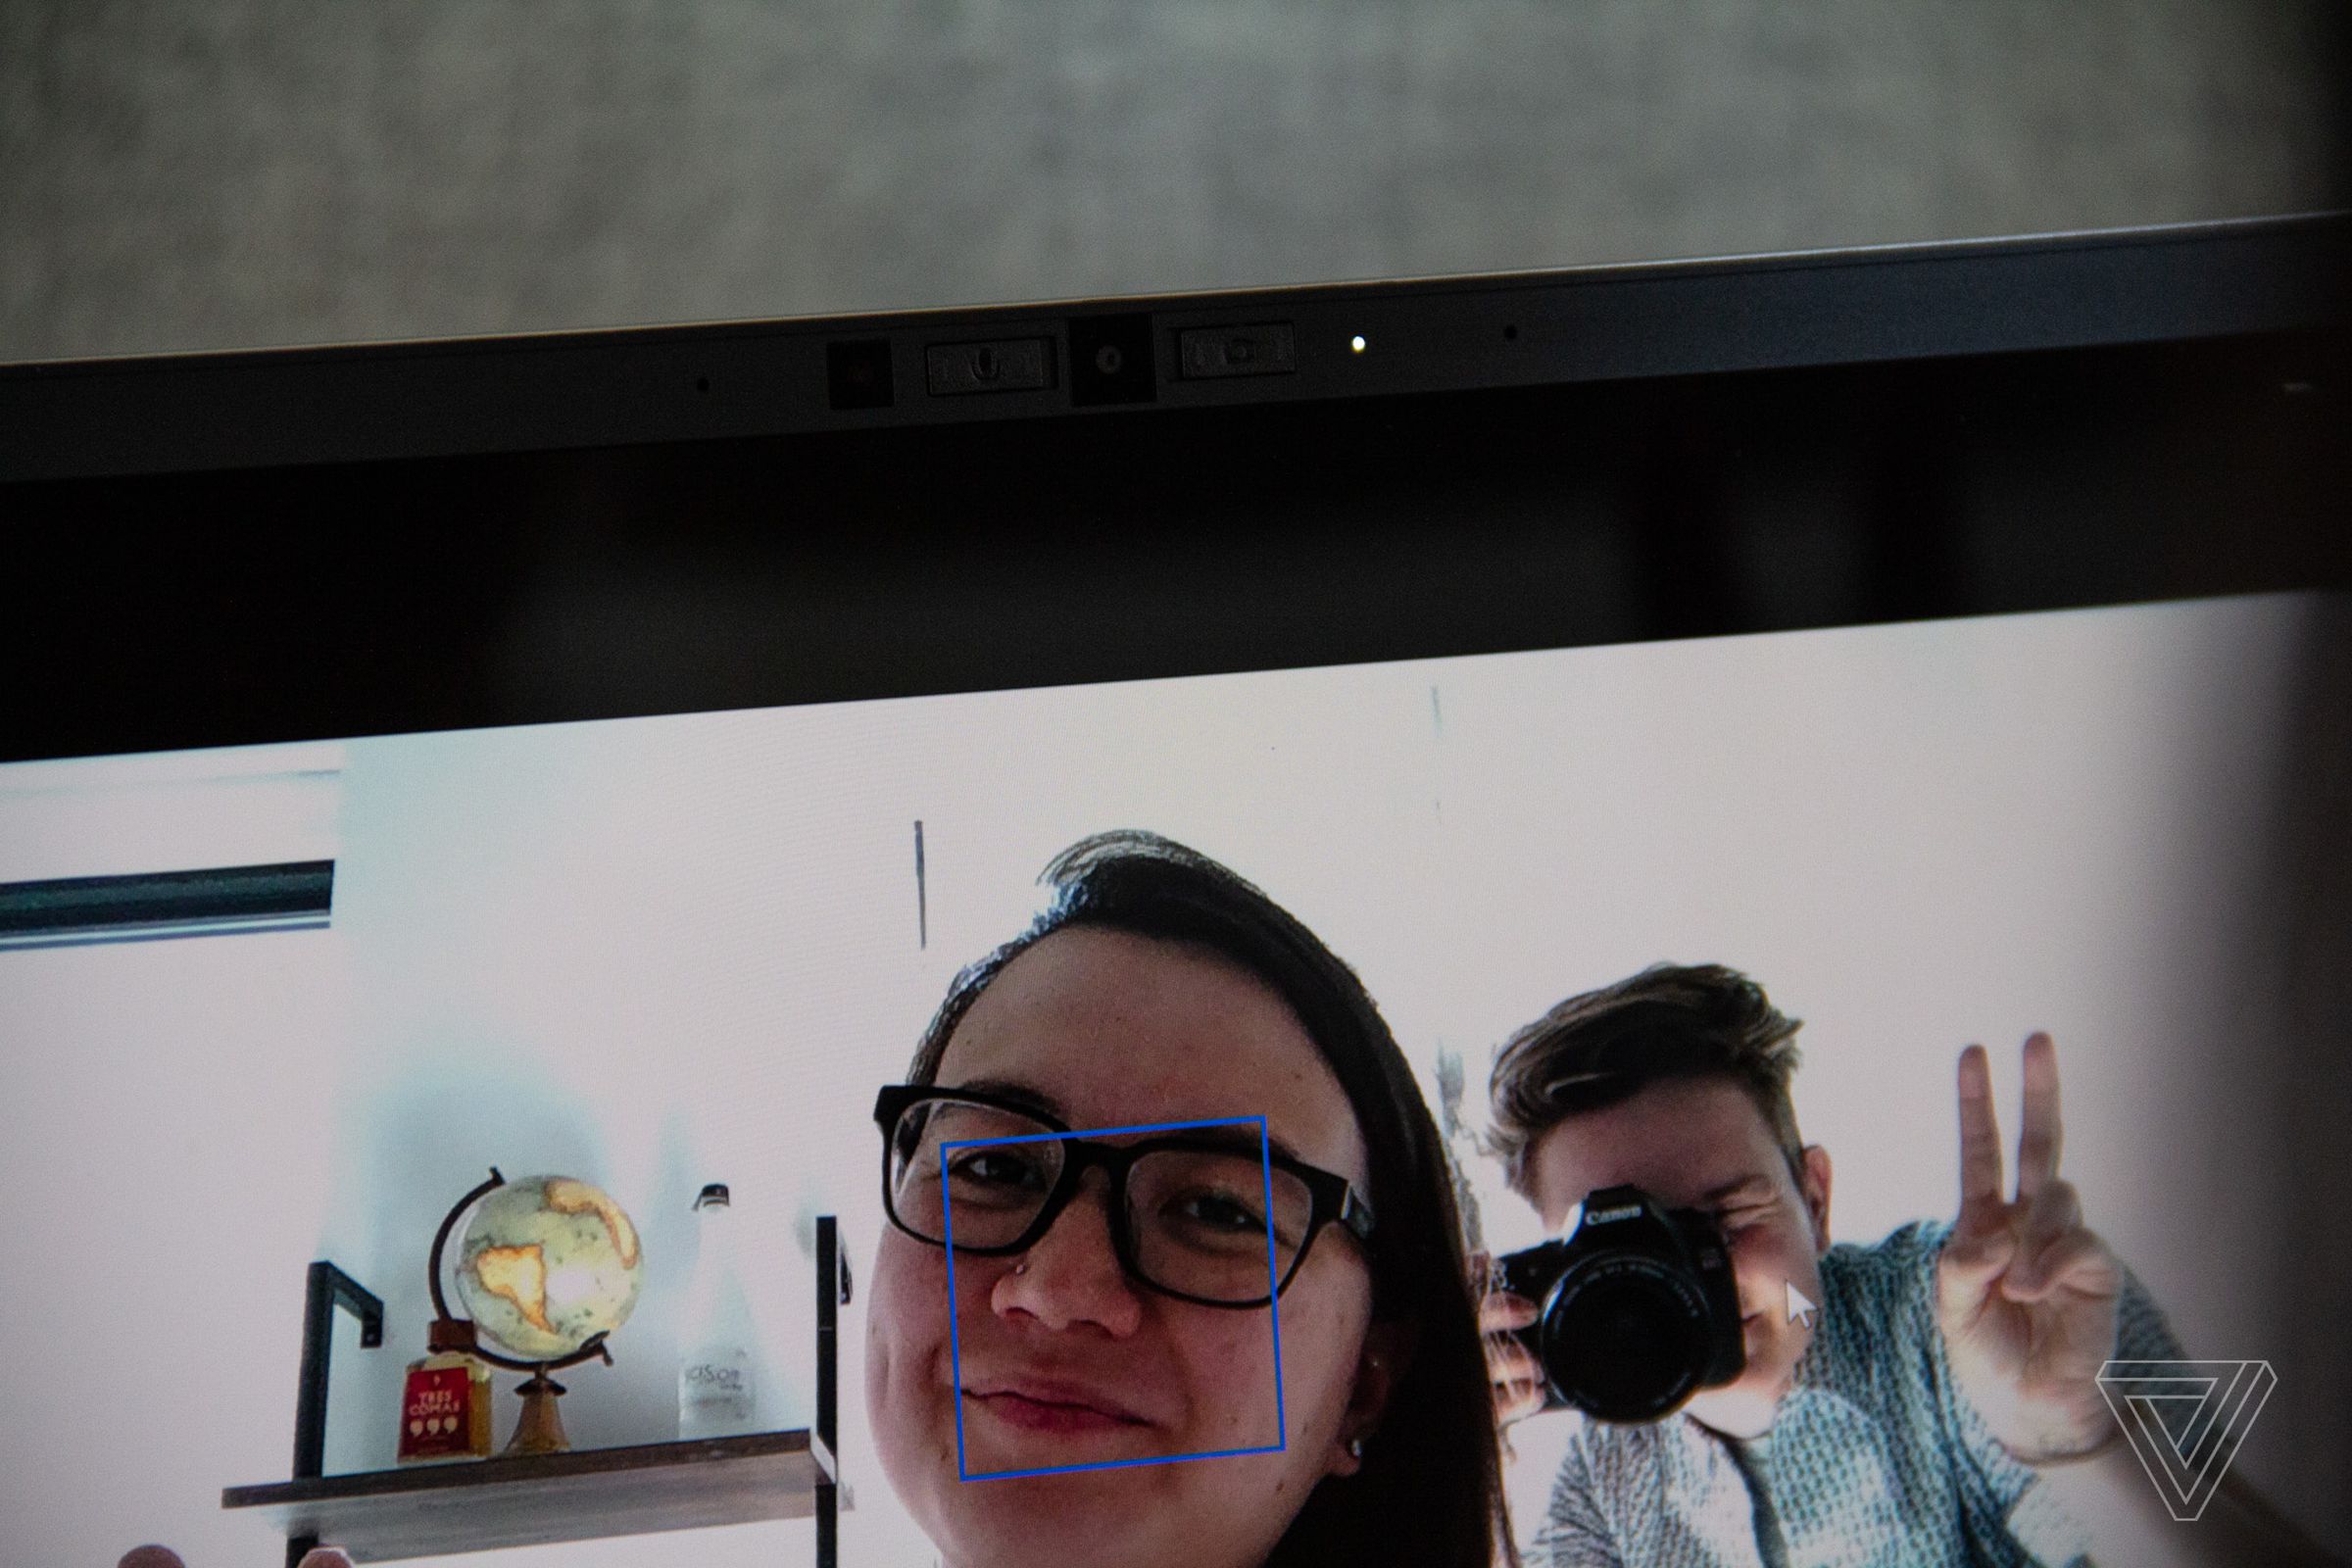 Two users seen in a camera utility through the Framework Latptop’s webcam. One smiles and one makes a peace sign.